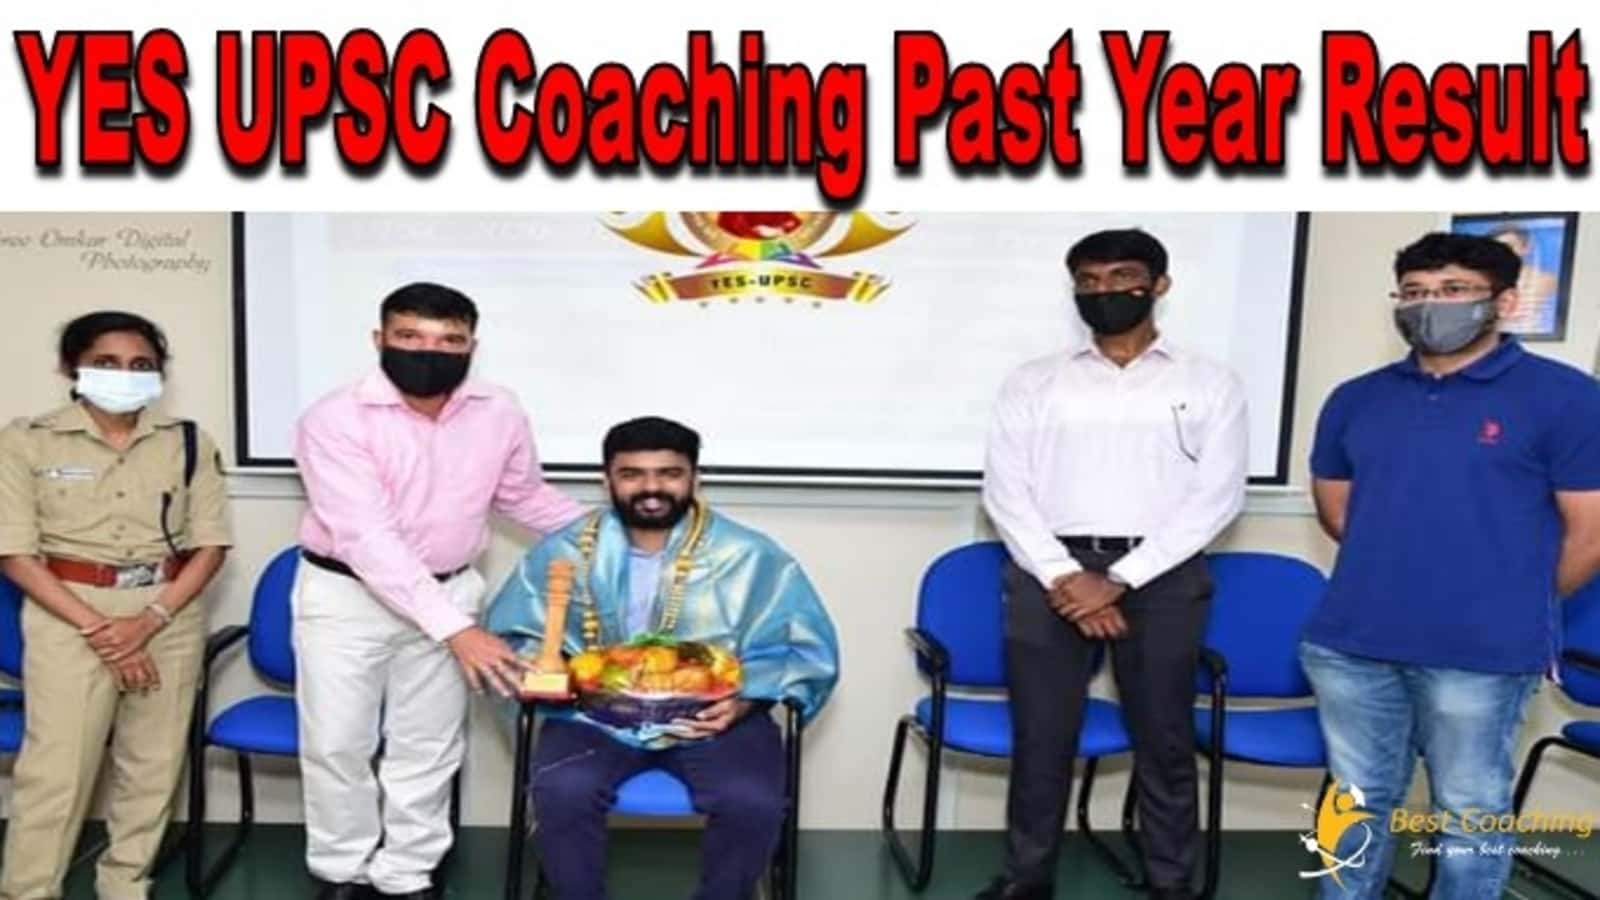 YES UPSC Coaching Past Year Result